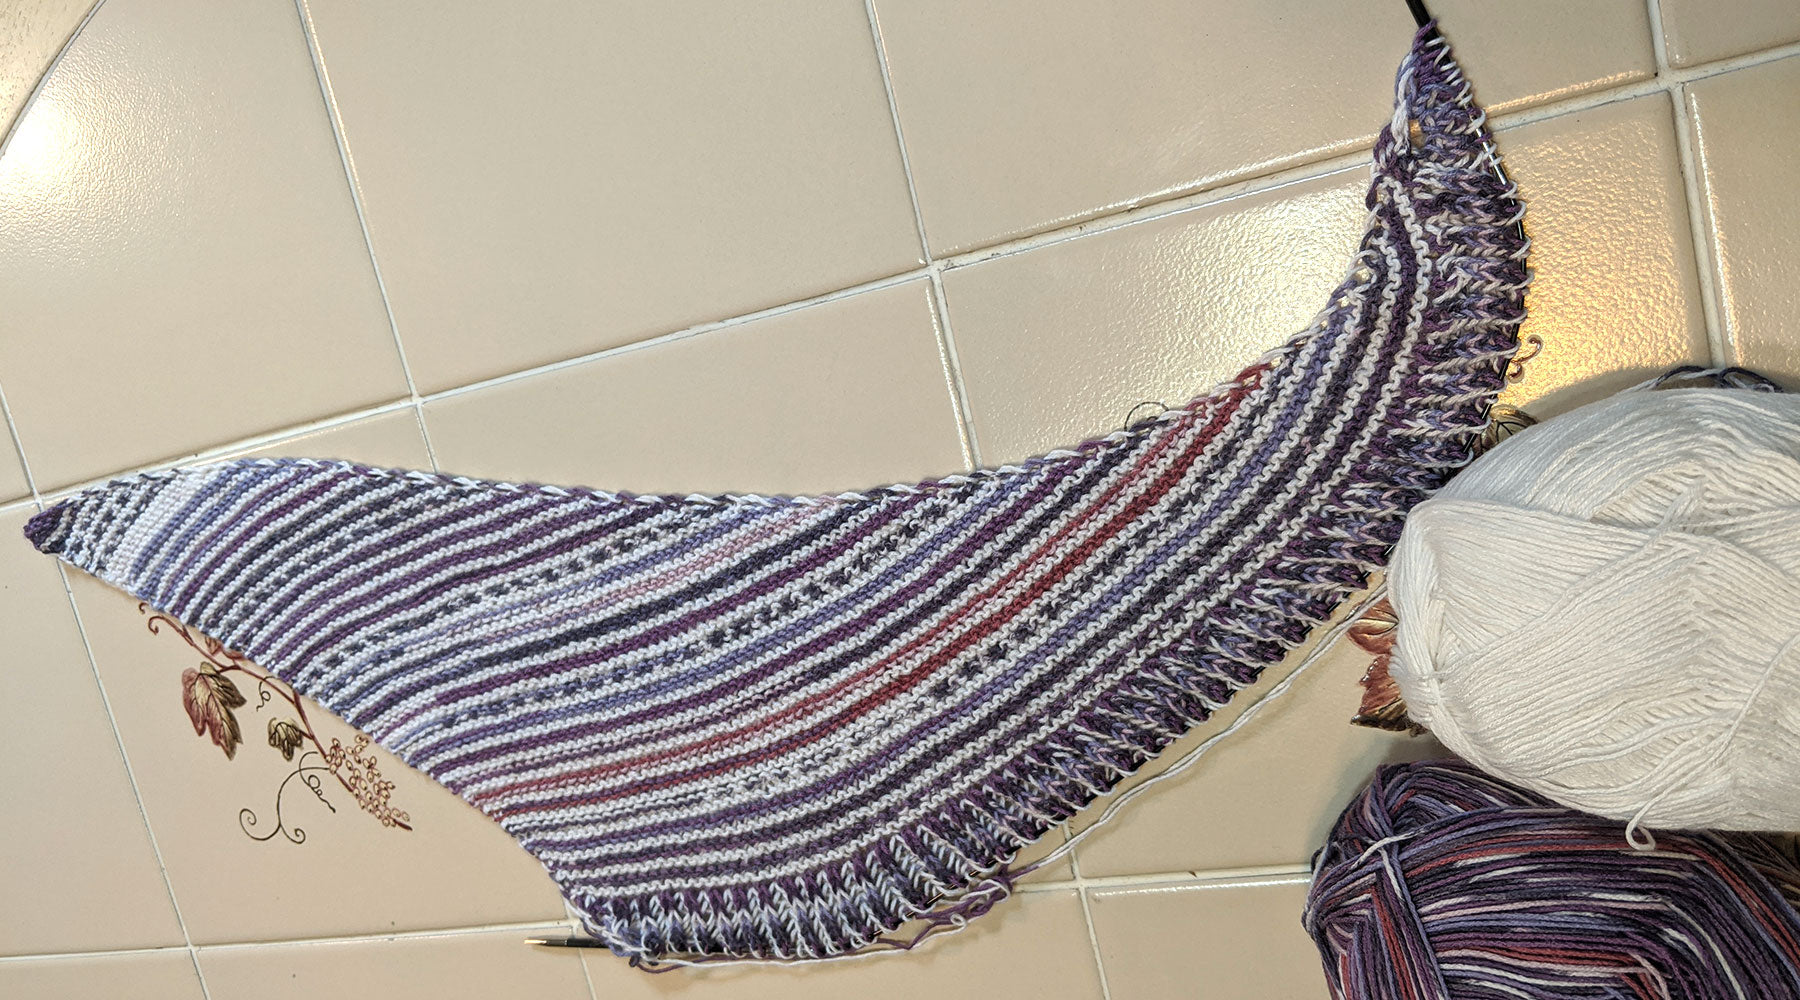 How To Knit The Baubles Shawl by Andrea Mowry (Setup, Stripes, and Syncopated Brioche)